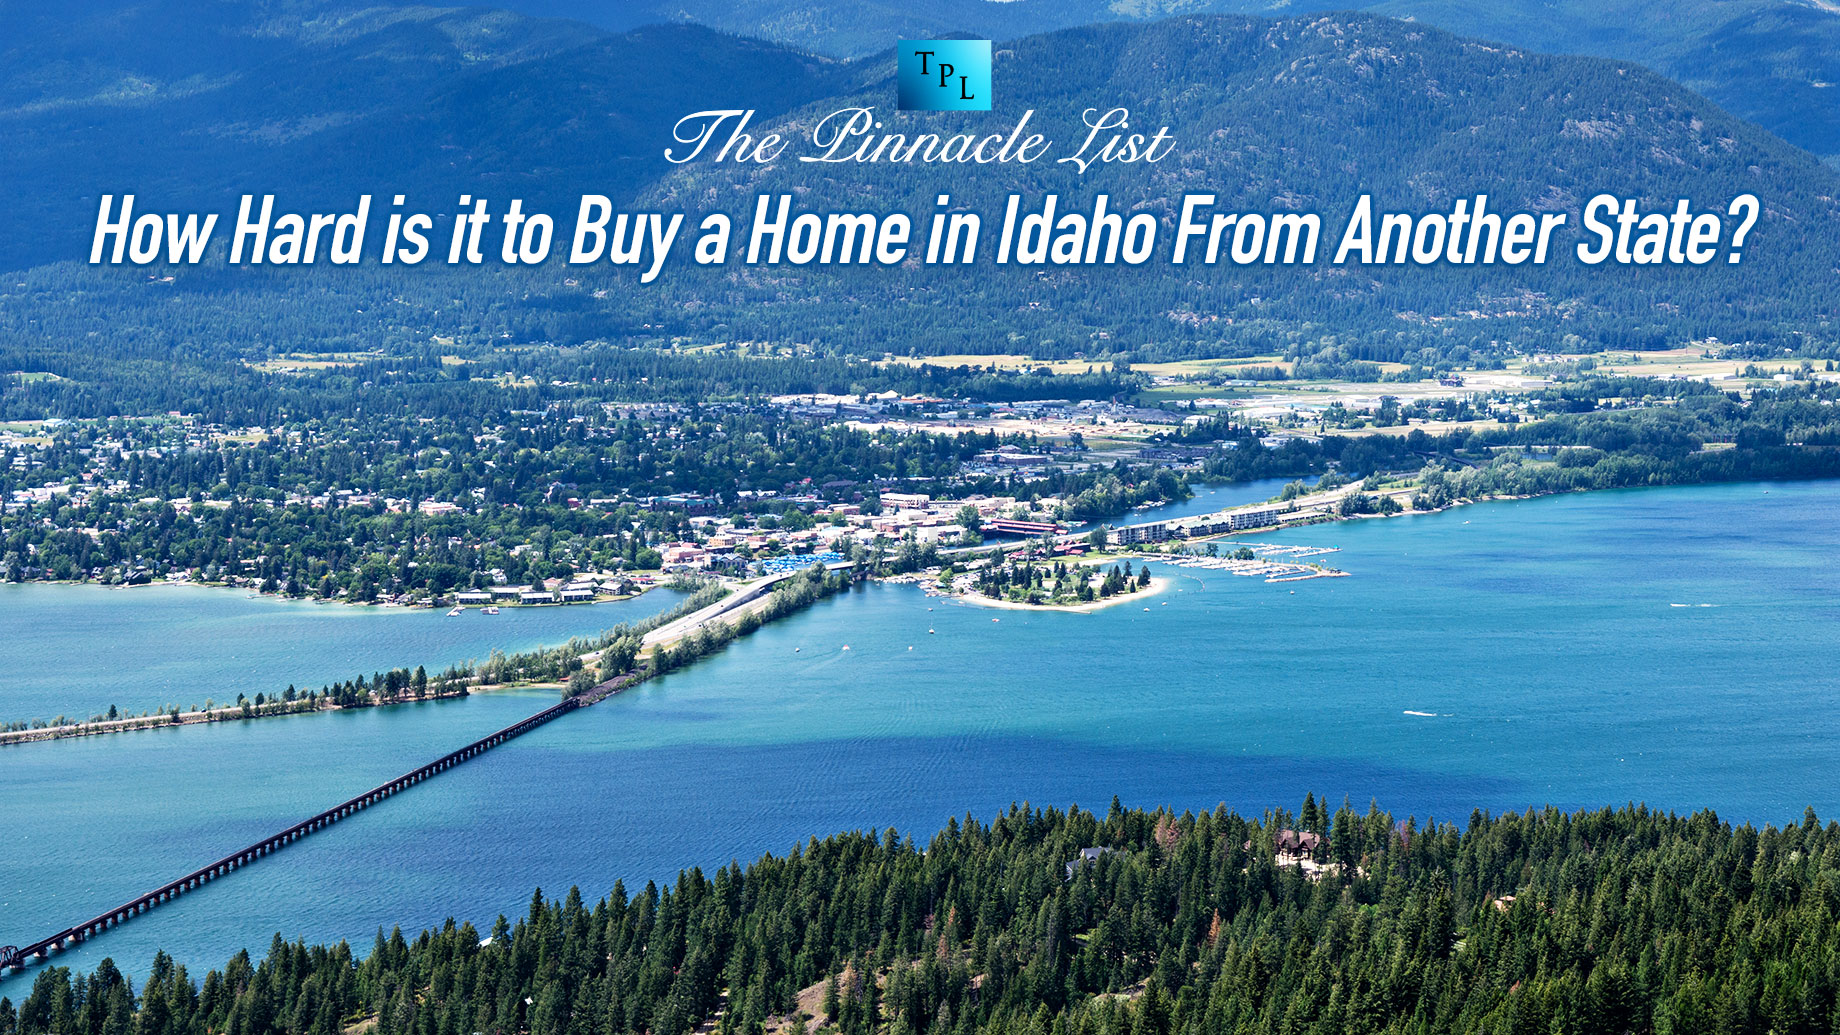 How Hard is it to Buy a Home in Idaho From Another State?